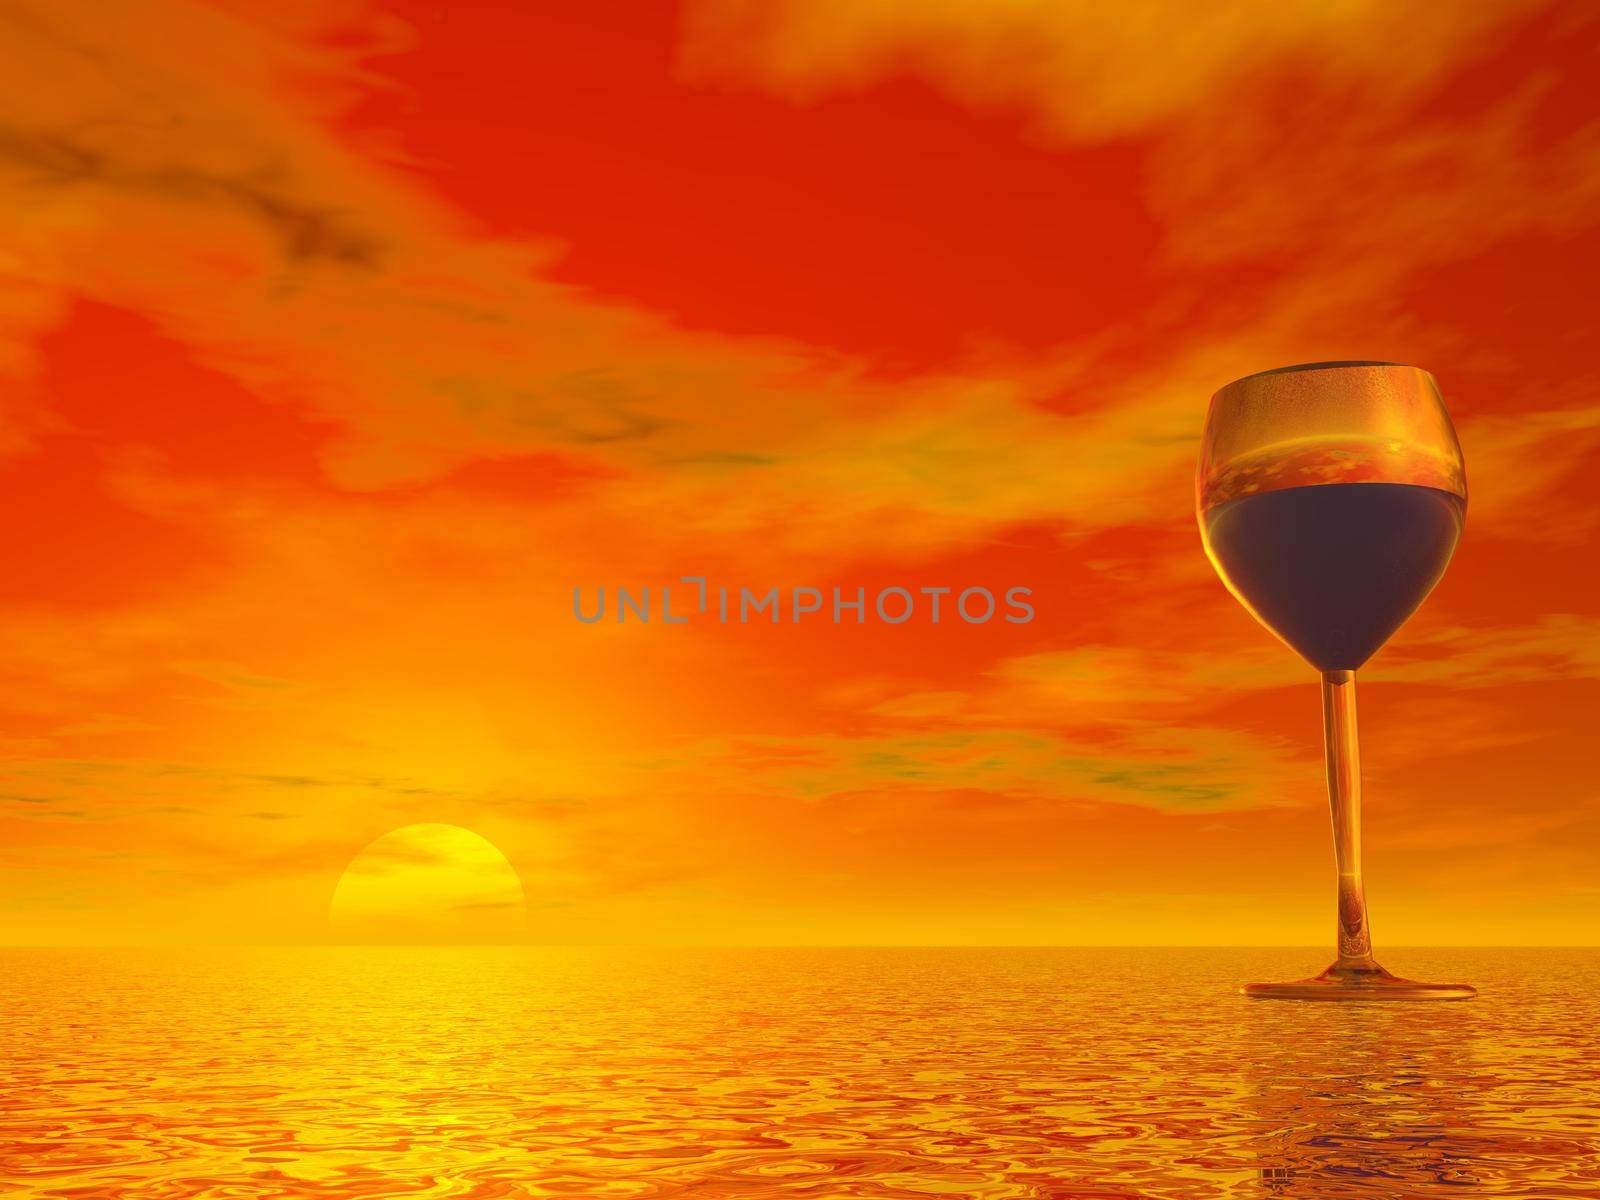 Glass with red wine inside upon water at beautiful colorful sunset